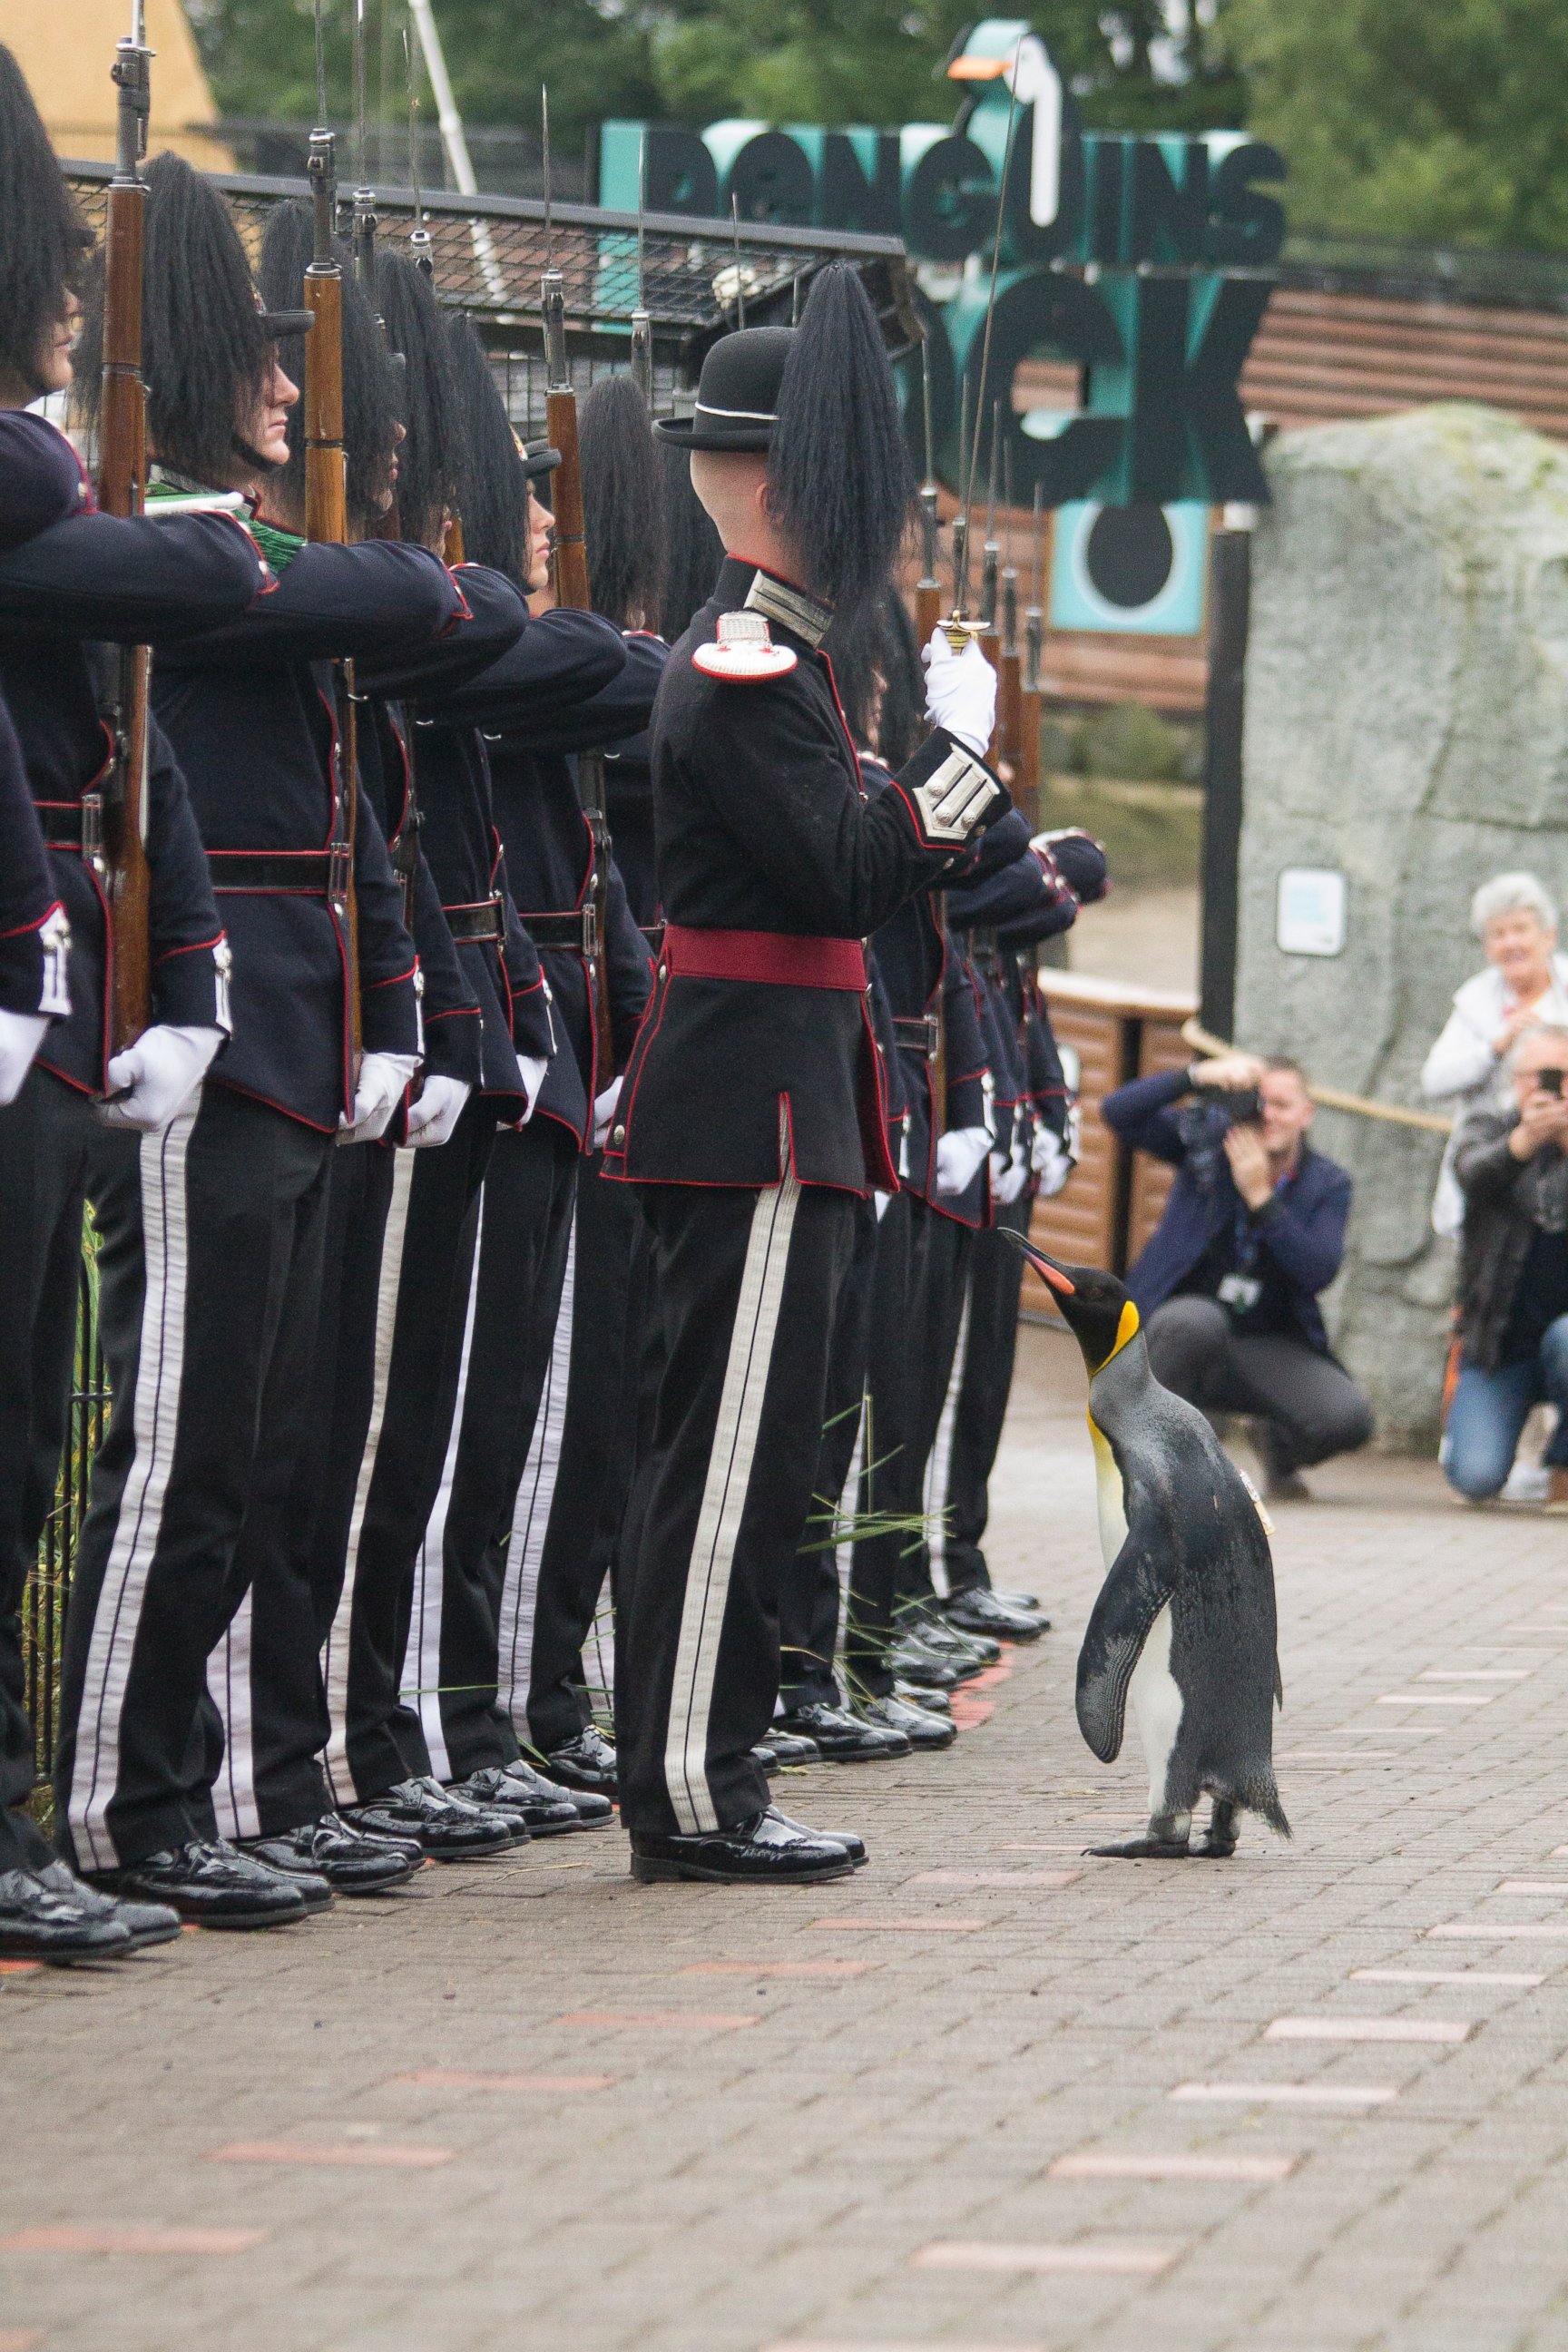 PHOTO: Sir Nils Olav, a king penguin who lives at the Edinburgh Zoo, surveys members of the Norwegian Royal Guard after his appointment as a brigadier on Aug. 22, 2016. 